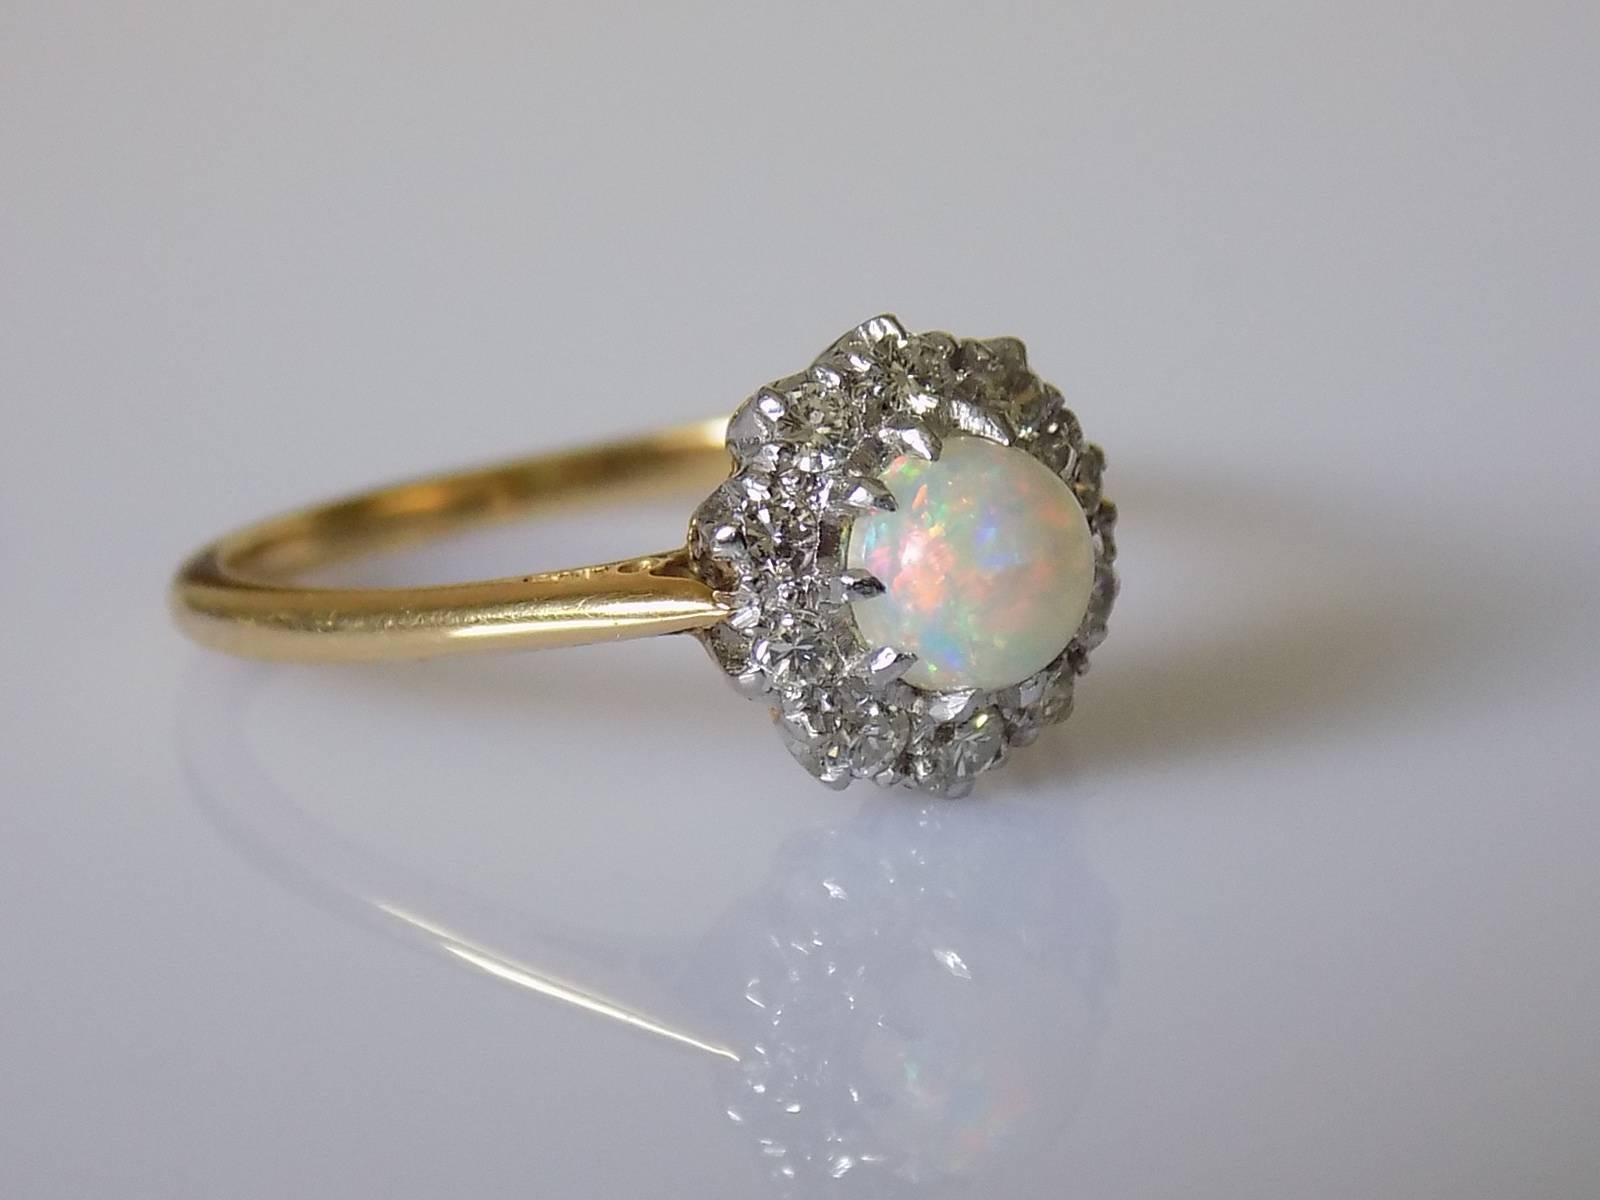 A Gorgeous Edwardian c.1910 18 Carat Gold, fine quality Australian Opal and Diamond cluster ring. English origin.
Size T UK, 10 US.
Height of the face 11mm.
Opal 5.5mm.
Round cut Diamonds approx. 2mm each.
Marked 18CT for 18 carat gold.
Excellent